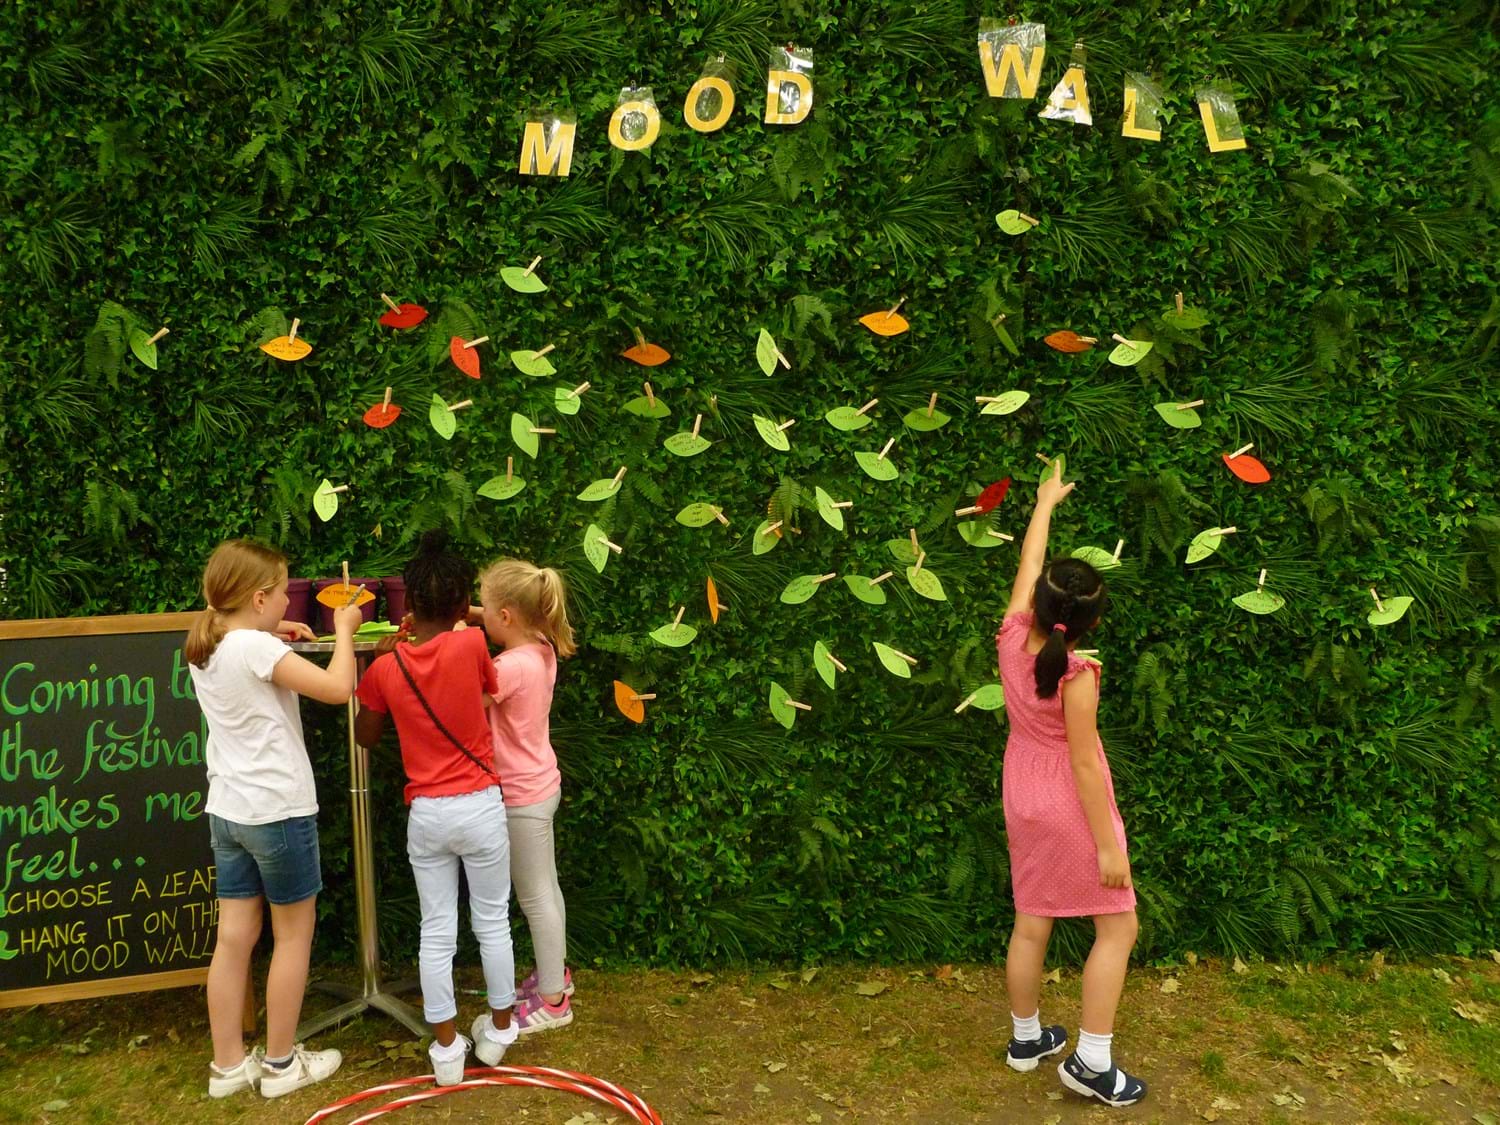 Feel Good Festival Mood Wall Geffrye Museum Of The Home